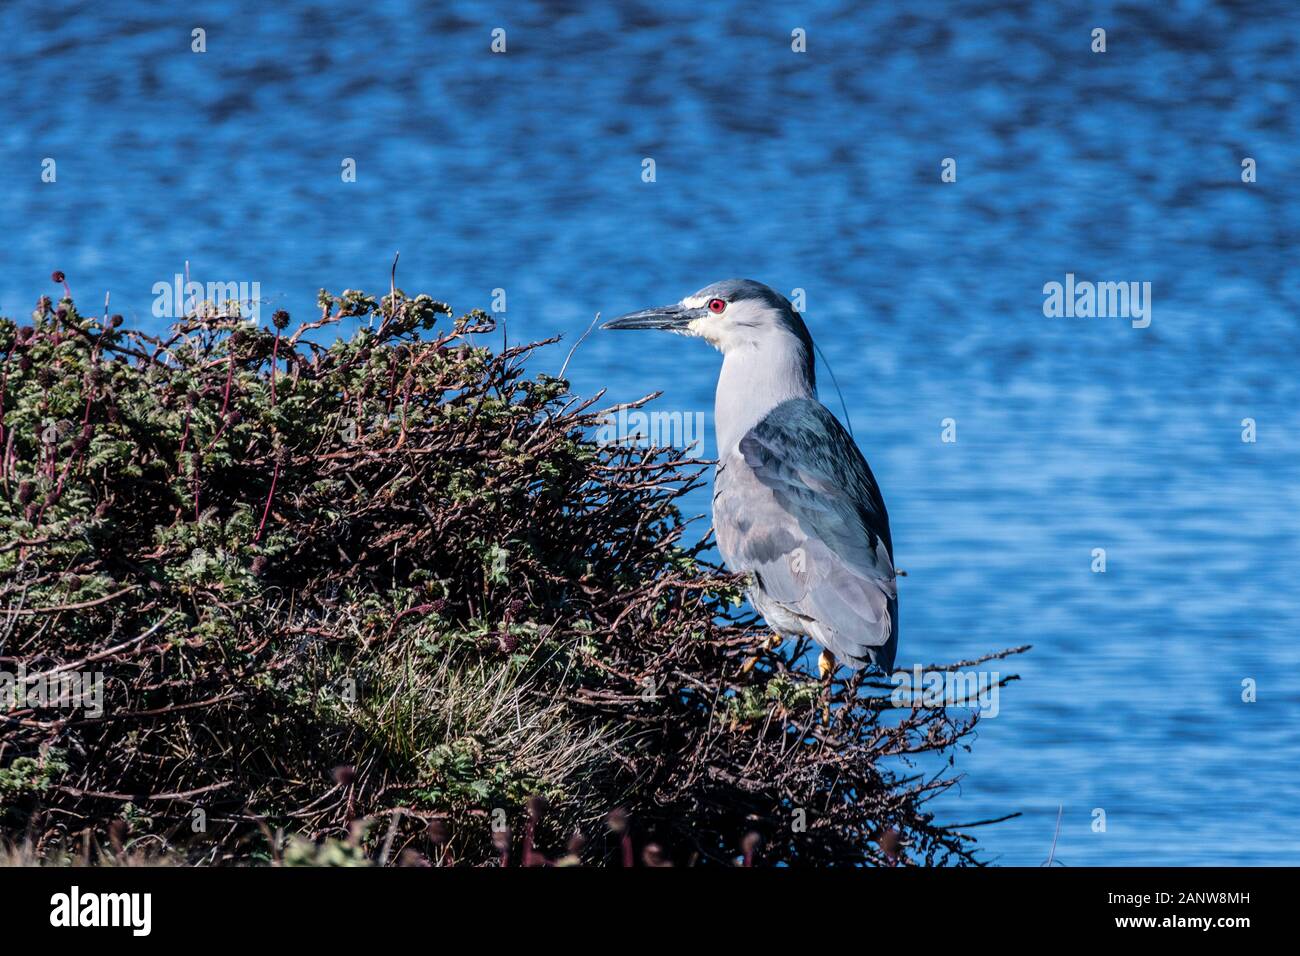 Black-crowned Night Heron, Nycticorax nycticorax cyanocephalus, standing on the shore of Long Pond, Sea Lion Island, Falkland Islands, South Atlantic Stock Photo